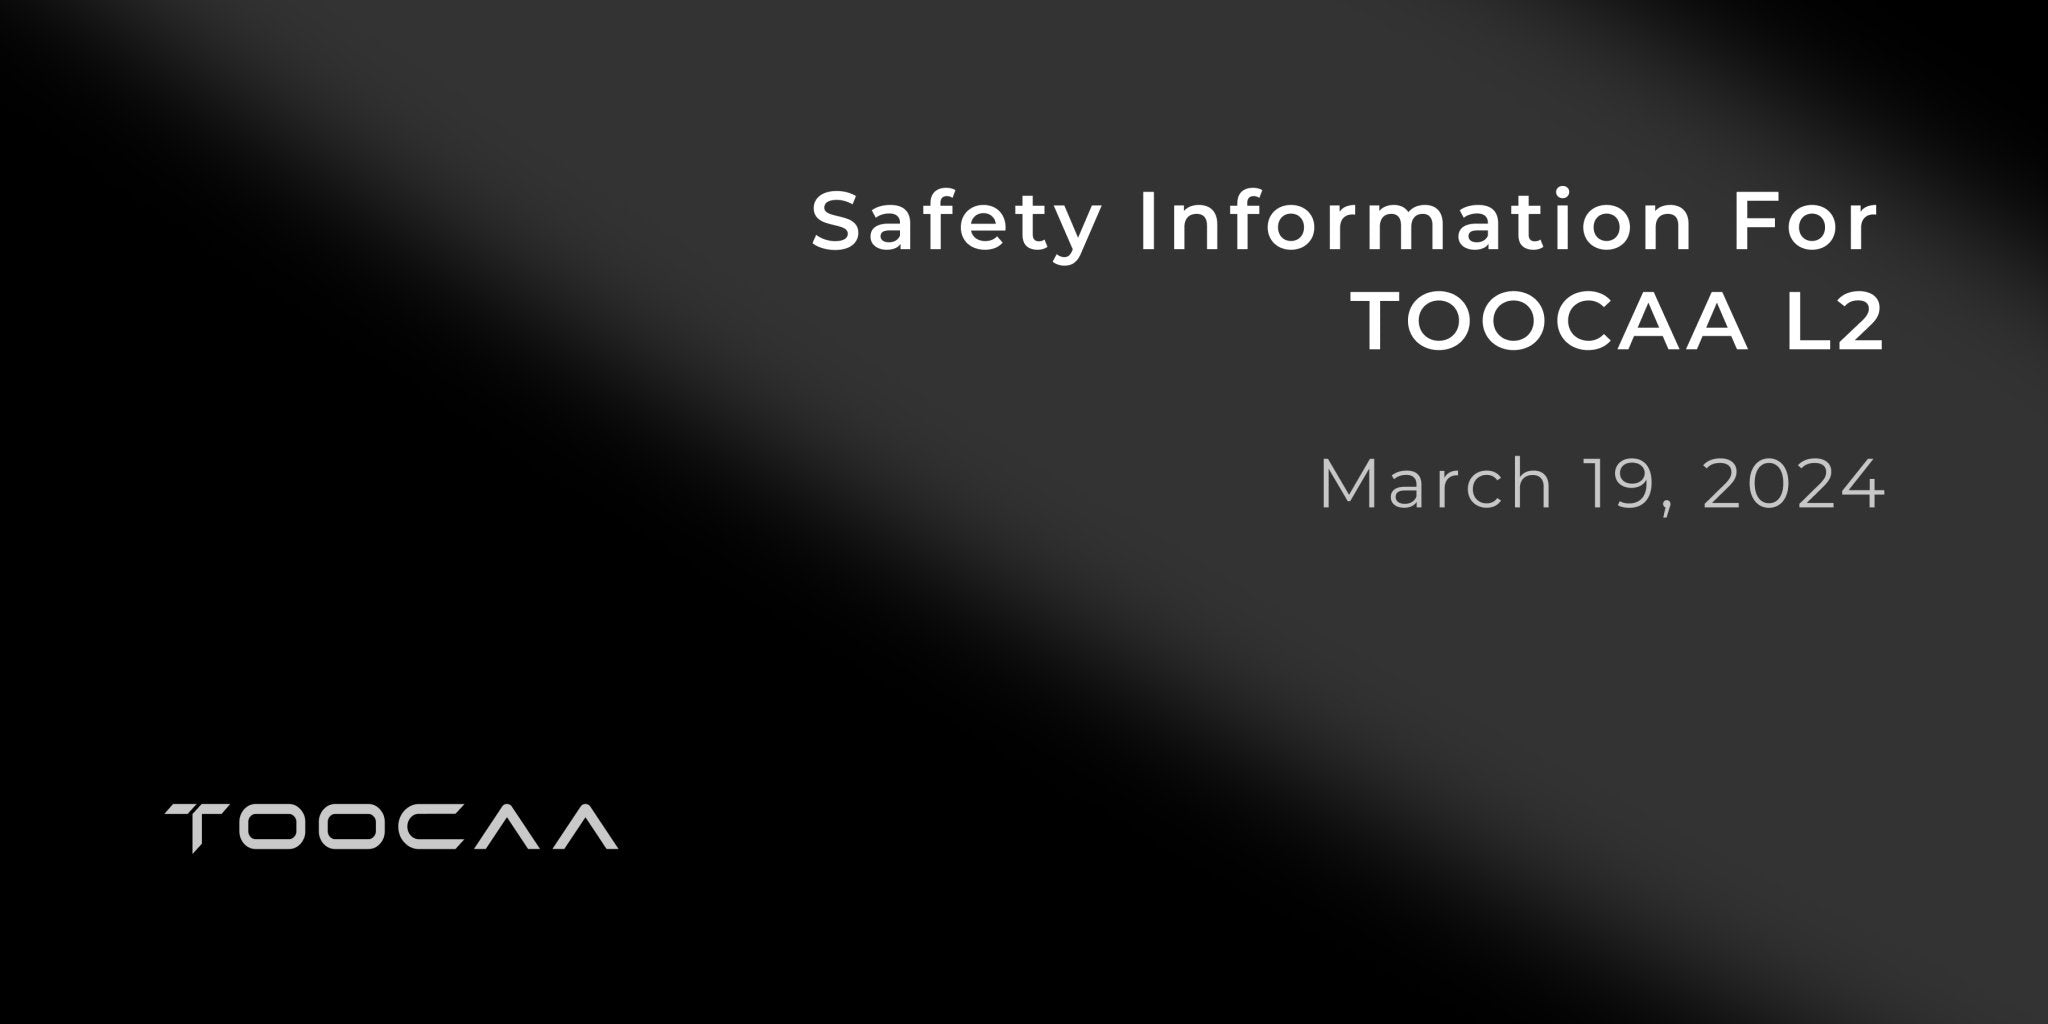 Safety Information For TOOCAA L2